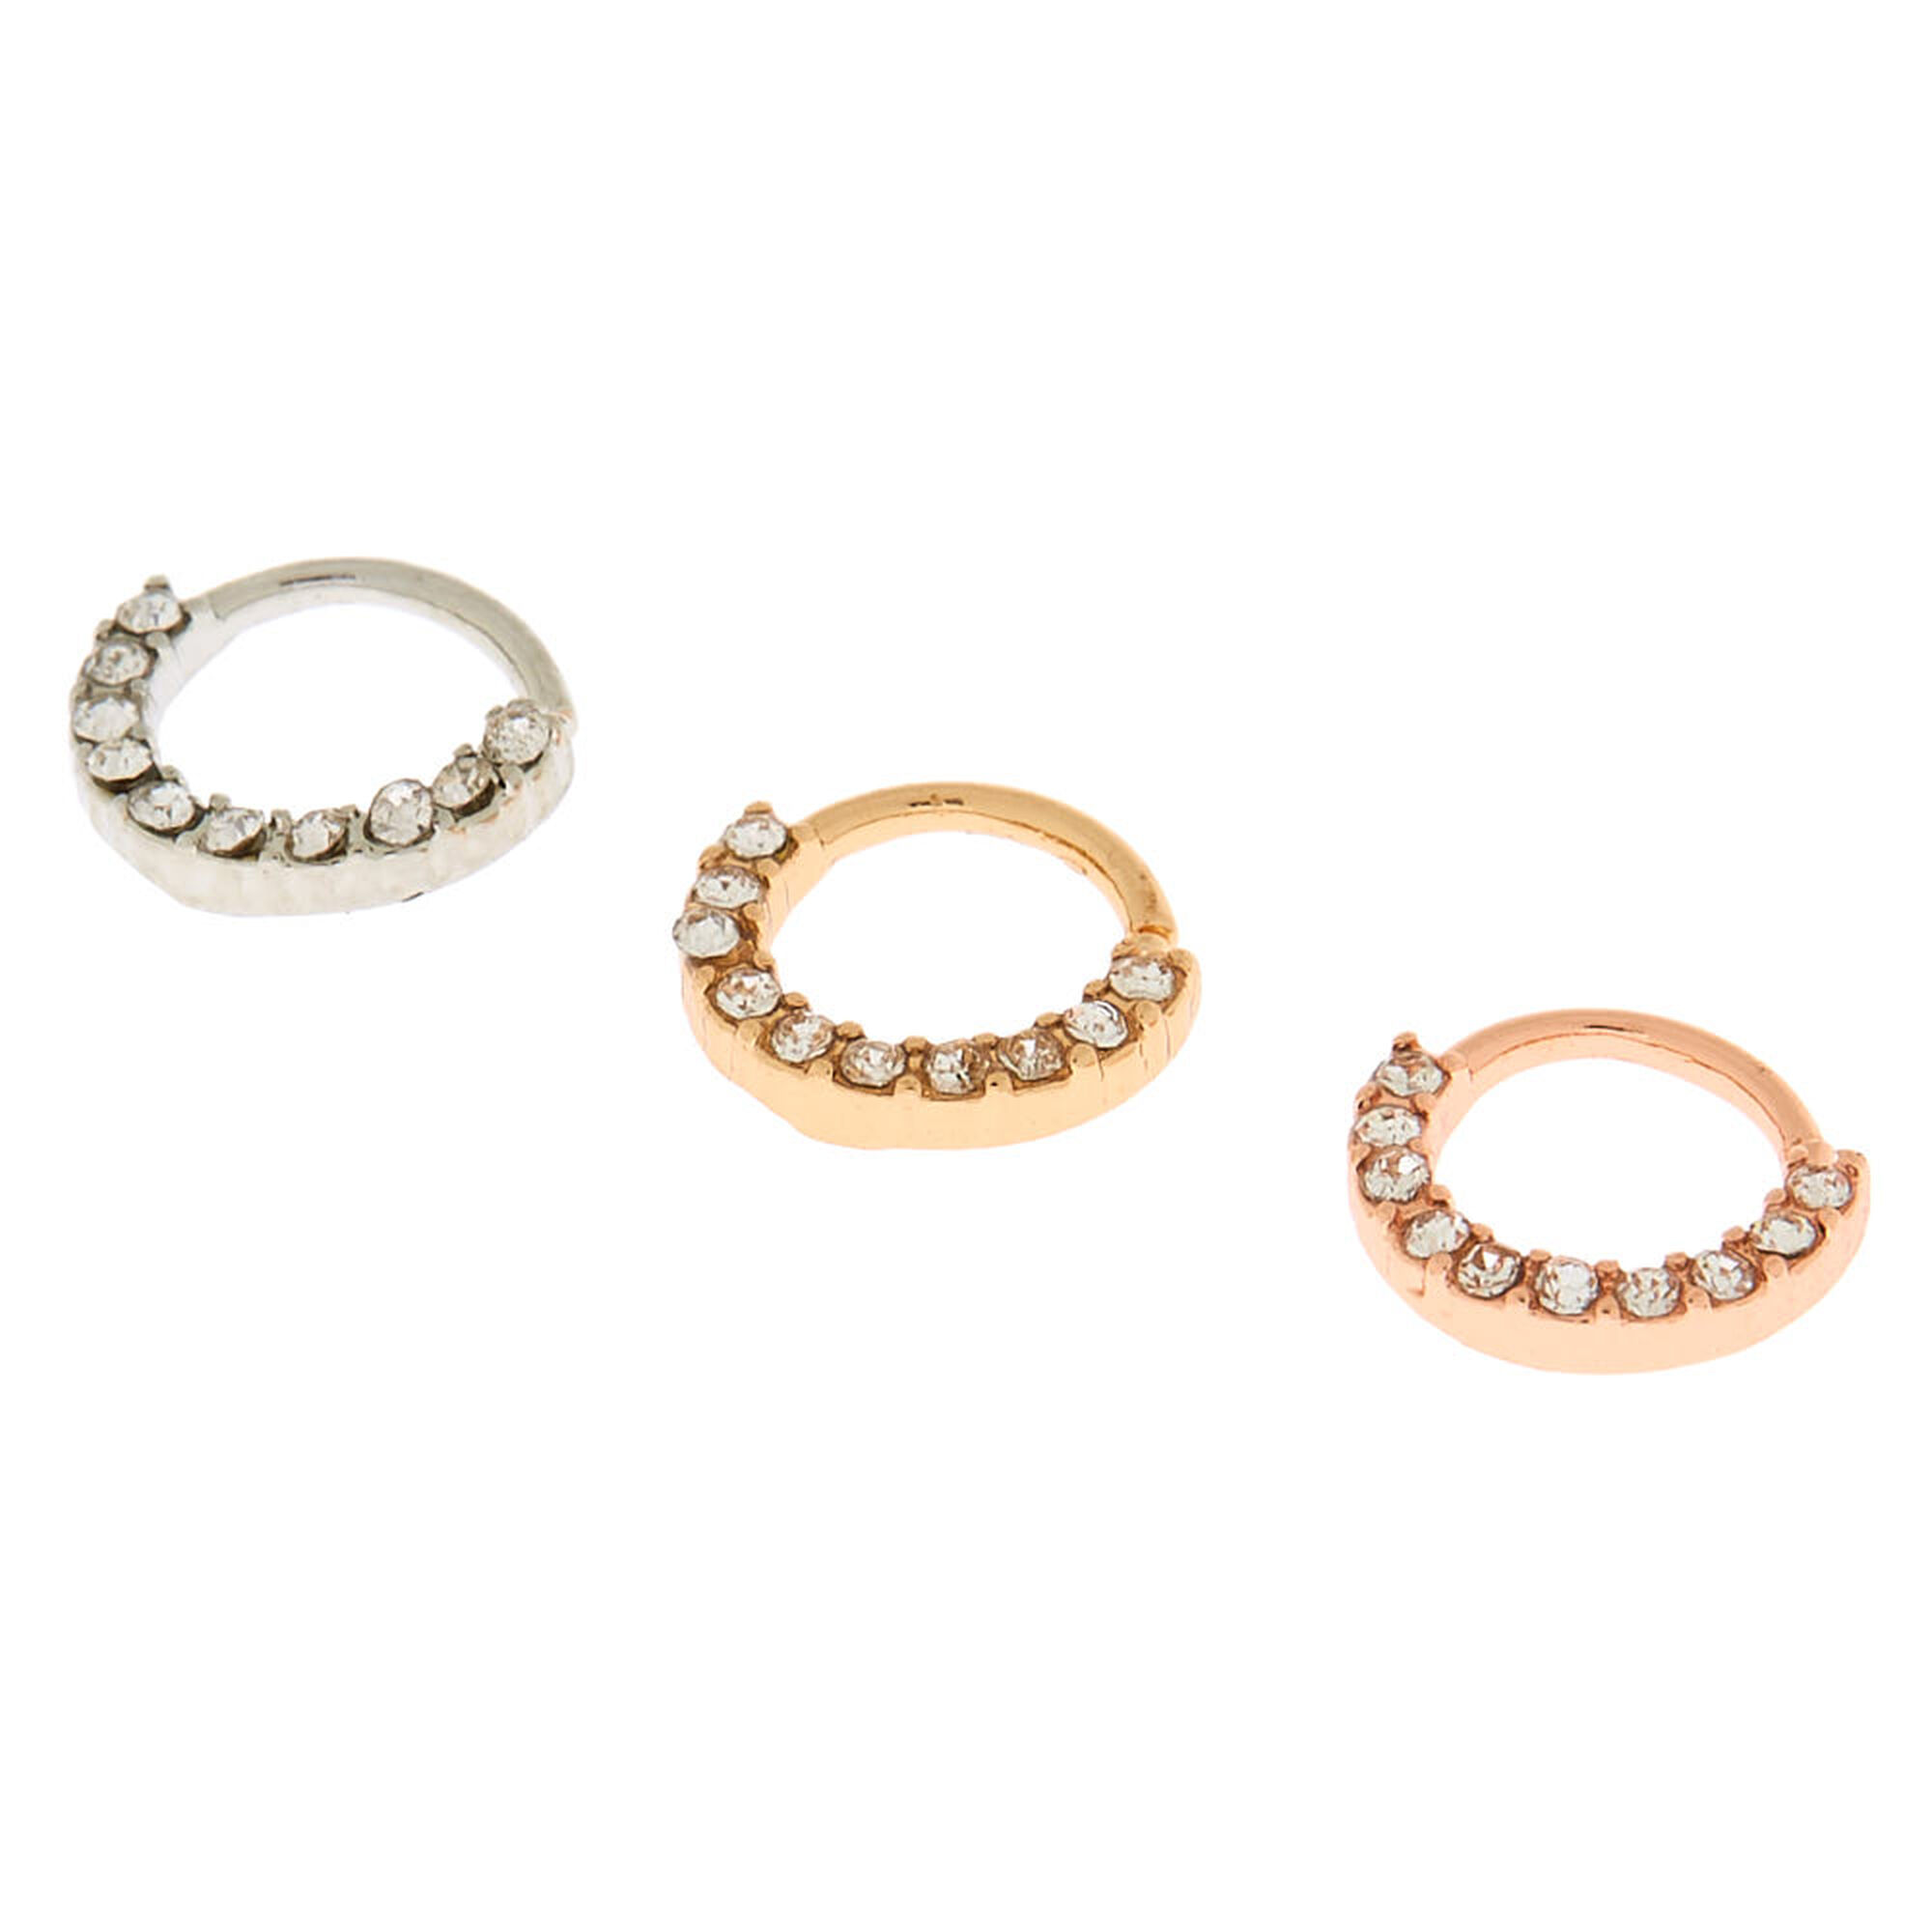 View Claires Mixed Metal 20G Mini Cartilage Hoop Earrings 3 Pack Rose Gold information